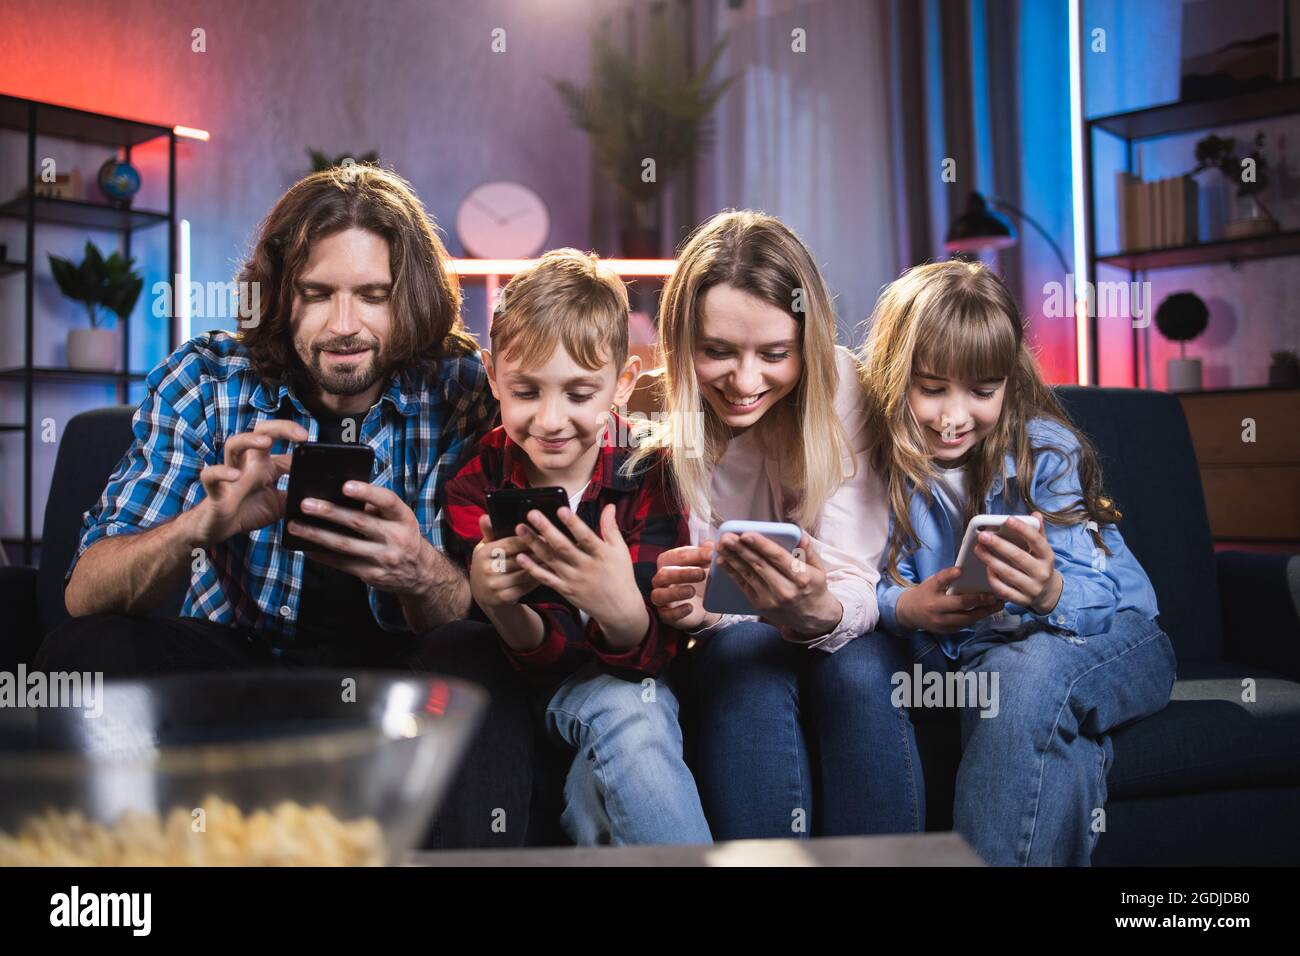 https://c8.alamy.com/comp/2GDJDB0/two-kids-and-their-parents-using-personal-smartphones-while-sitting-on-couch-smiling-family-with-gadgets-in-hands-spending-time-at-home-technology-and-people-concept-2GDJDB0.jpg